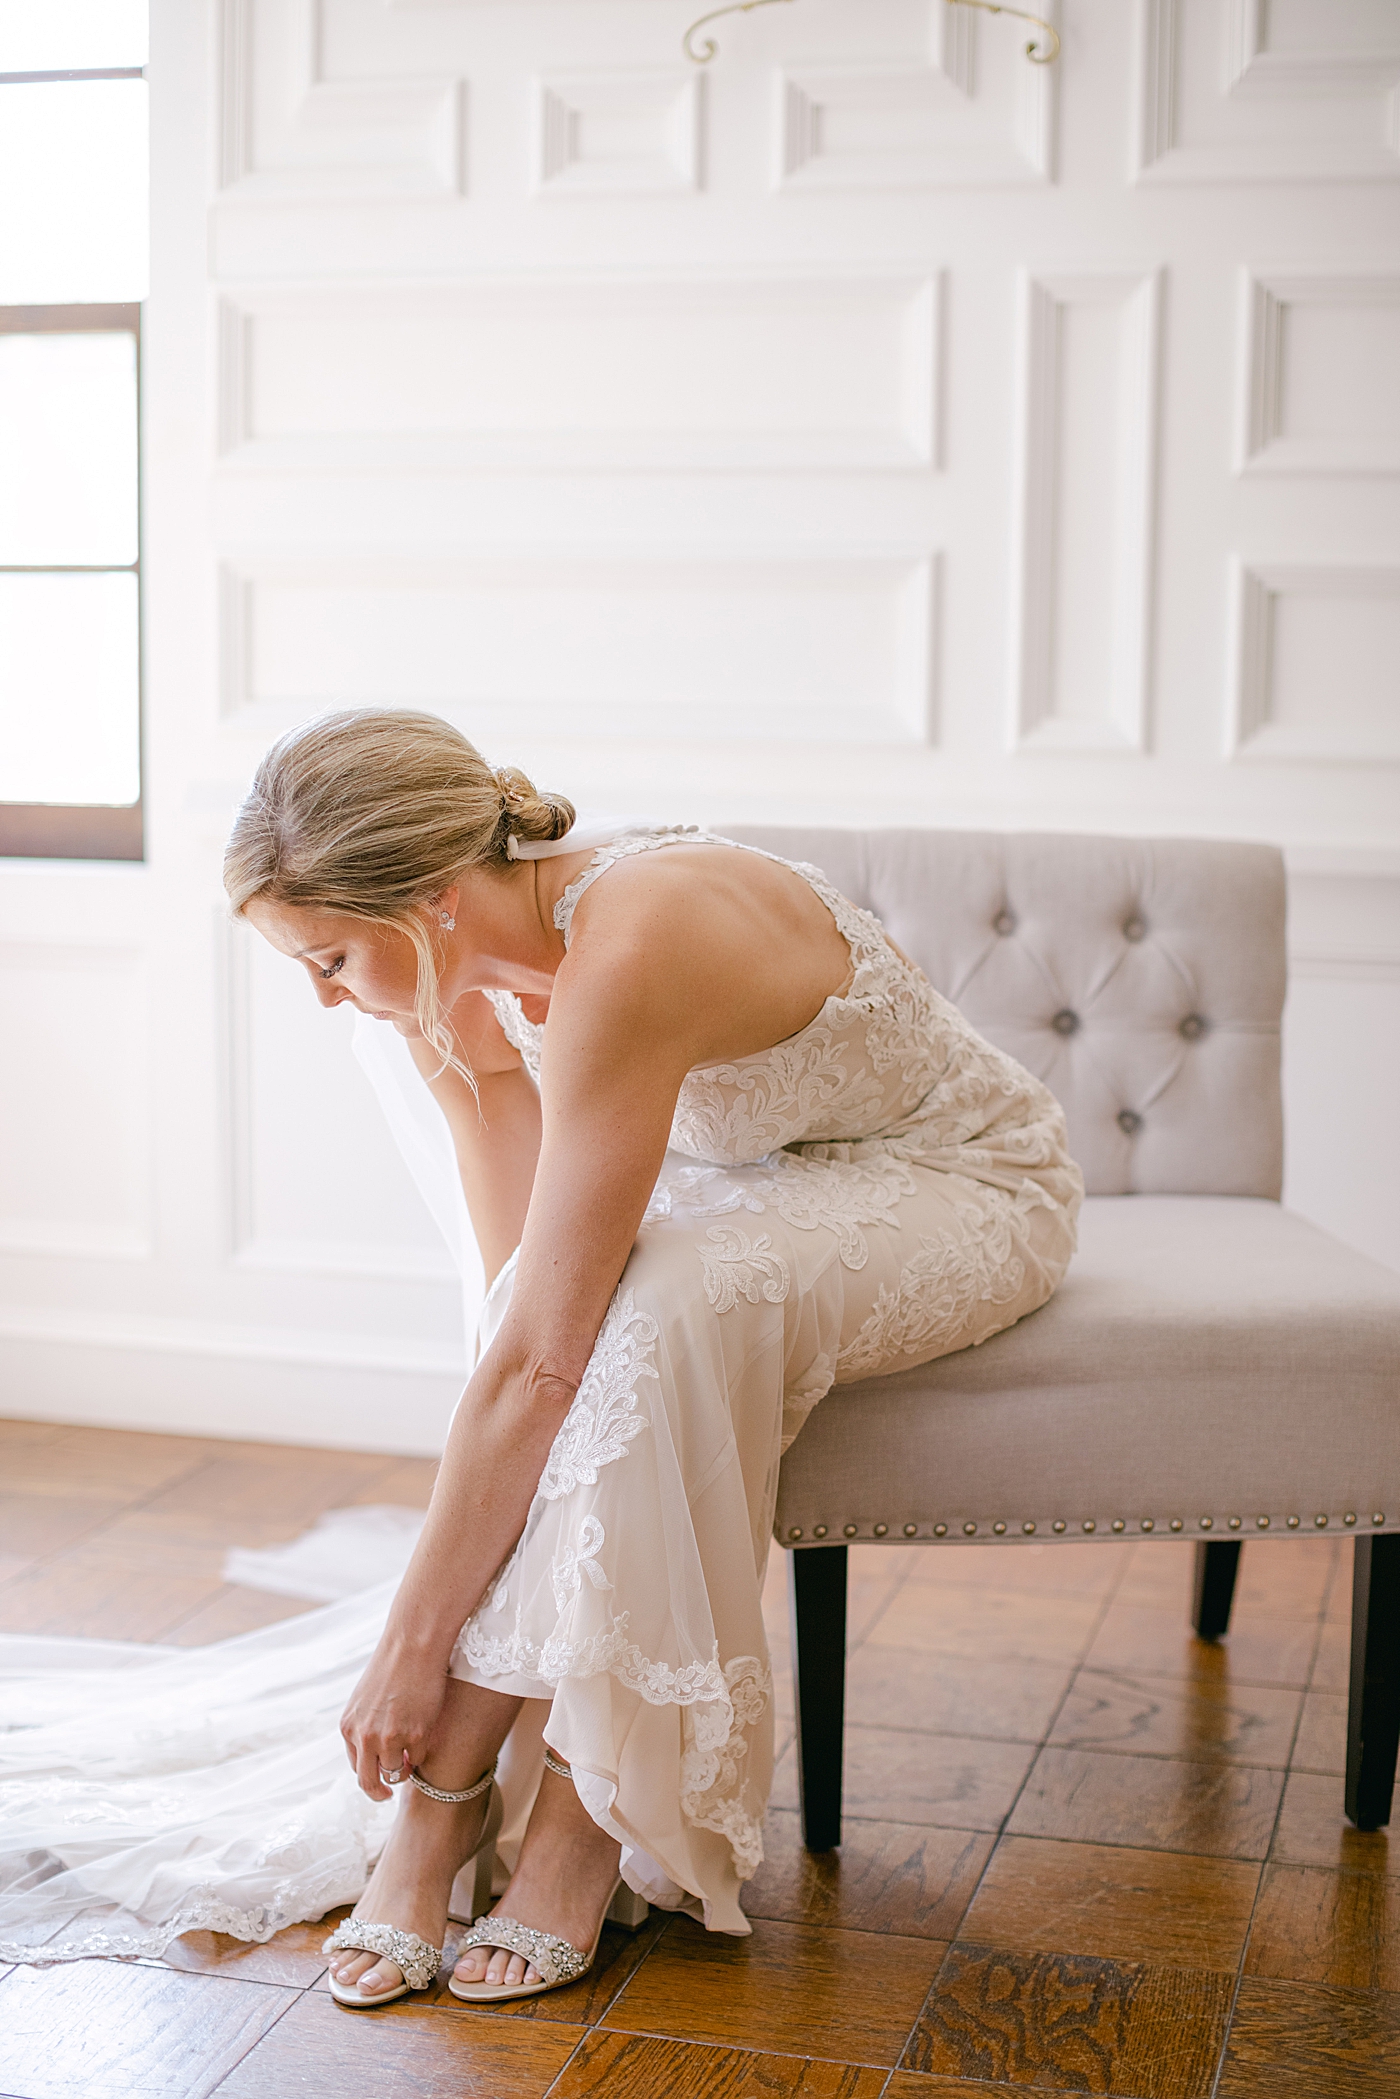 Bride putting on her shoes | Image by Hope Helmuth Photography